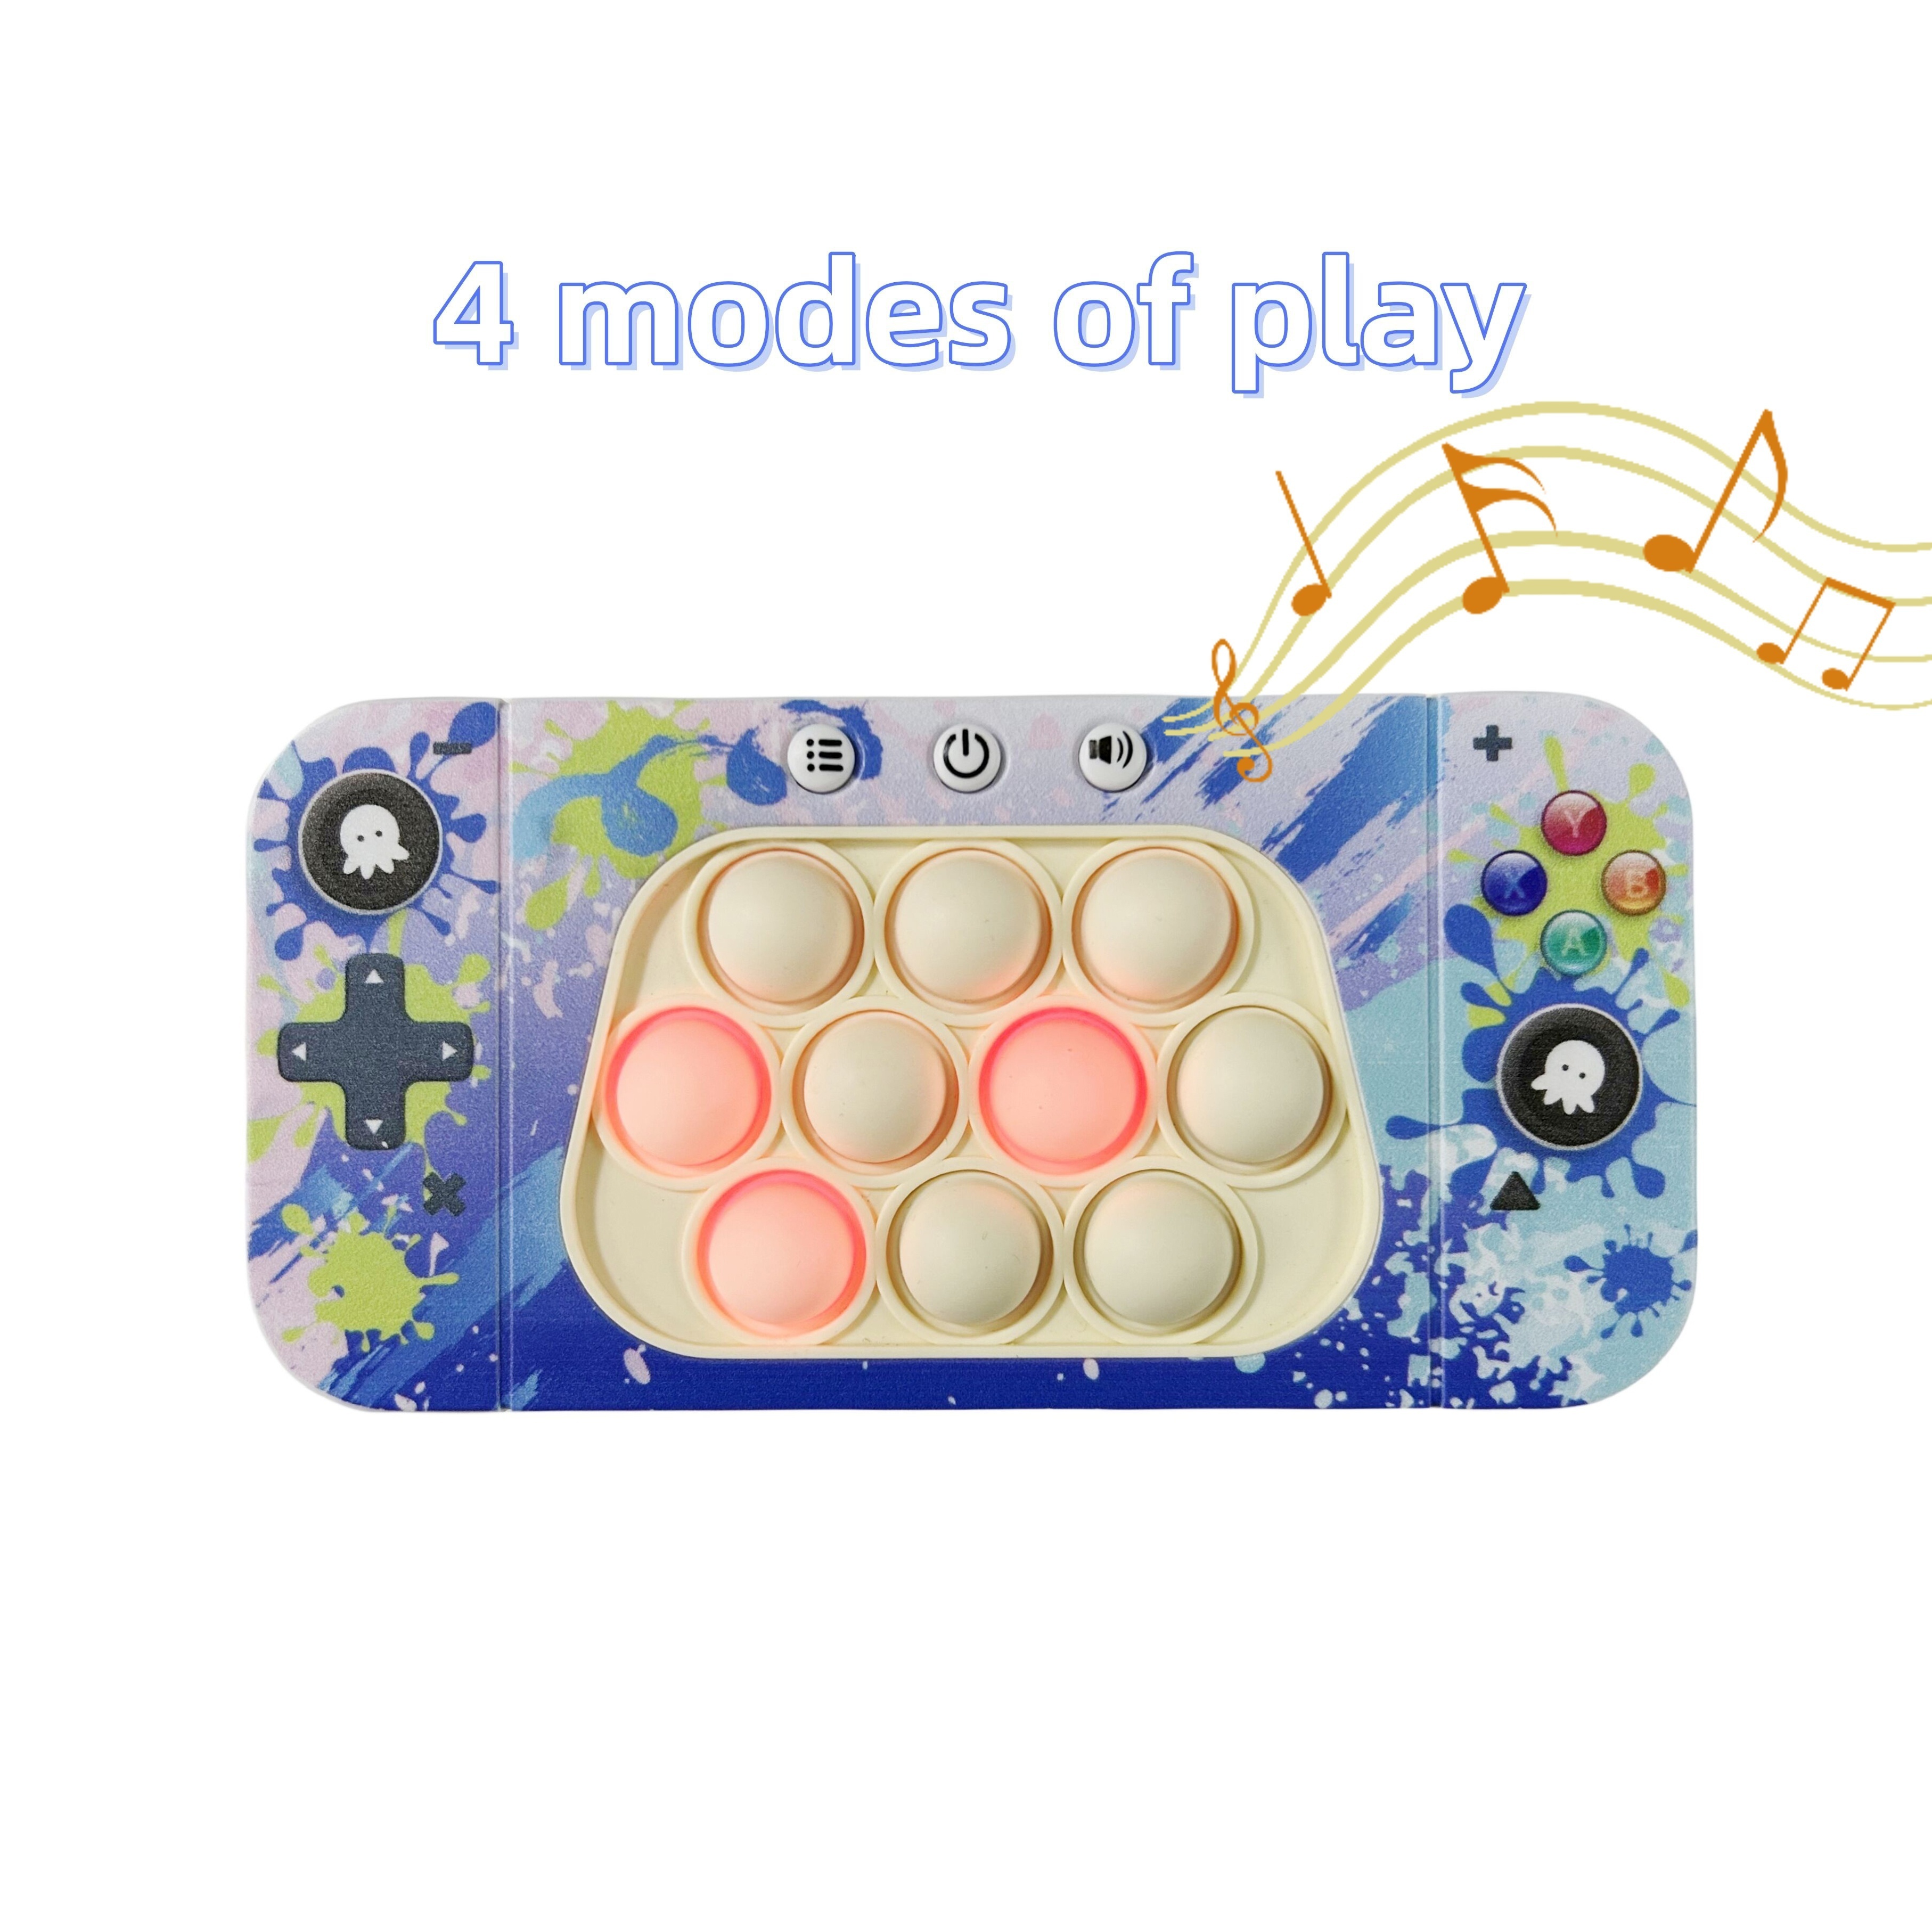 Quick Push Bubbles Game Console Whack-a-mole Fidget Toys Finger Sensory  Antistress For Kids Training Focused On Montessori Toys, Rose Red